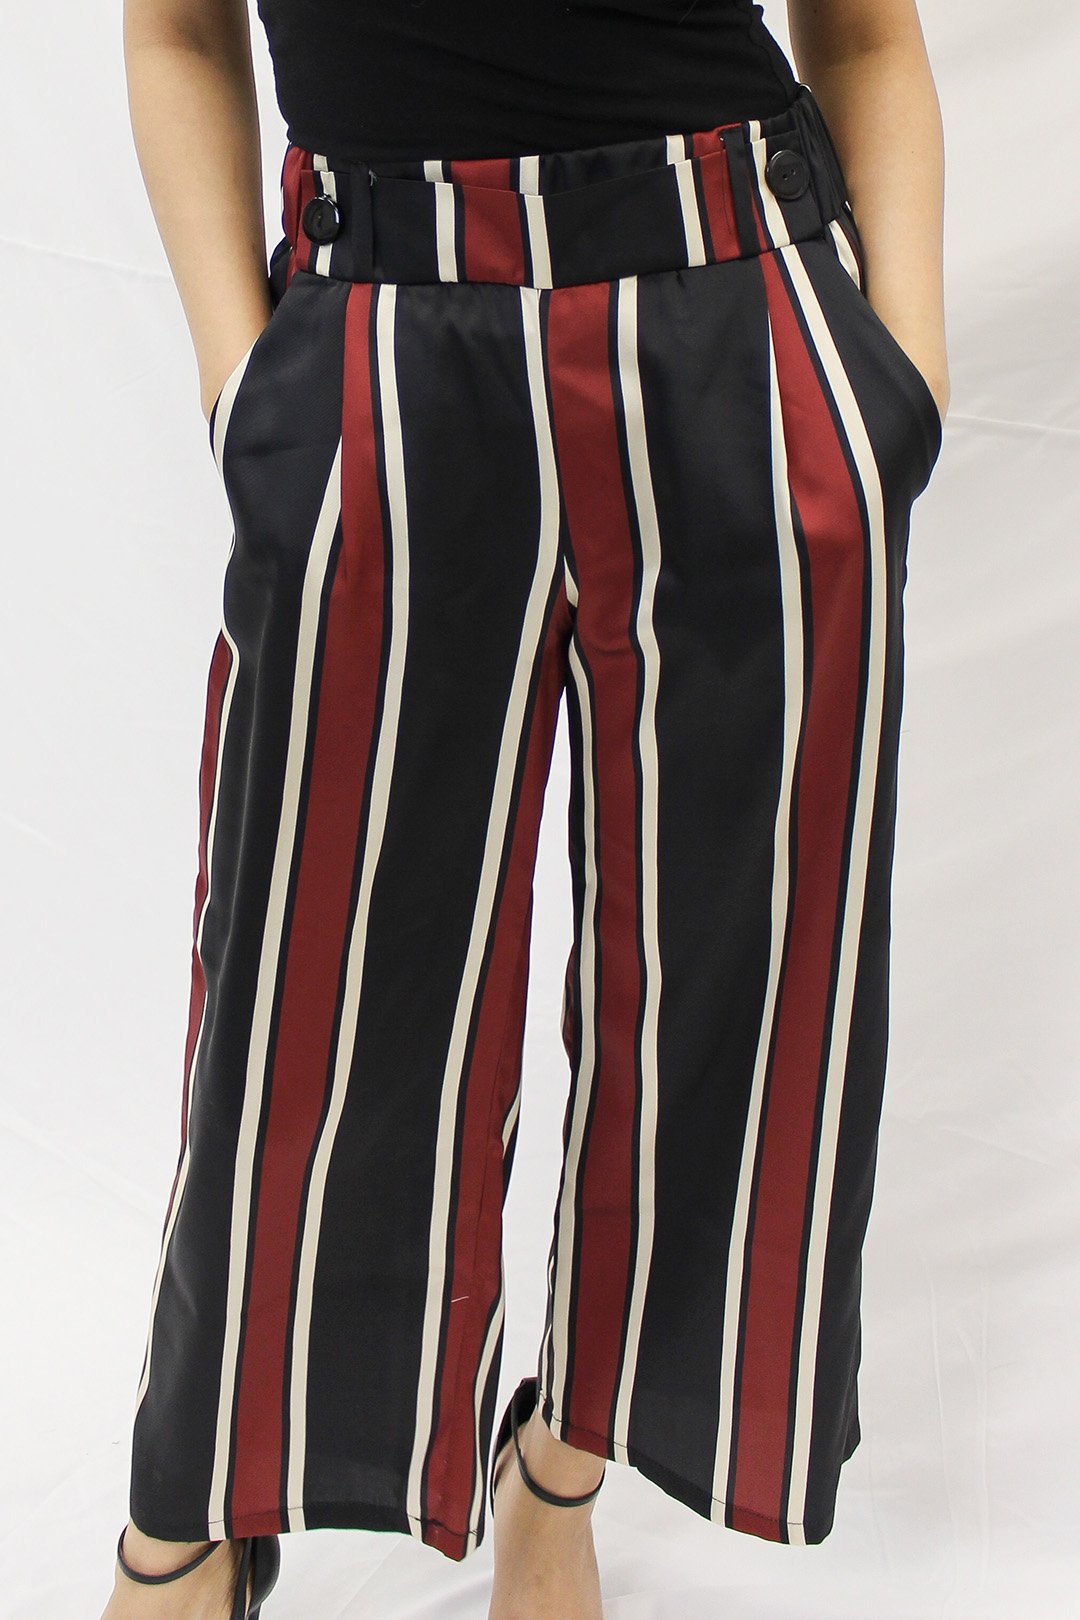 Silky smooth thin wide leg pants with thick waistband